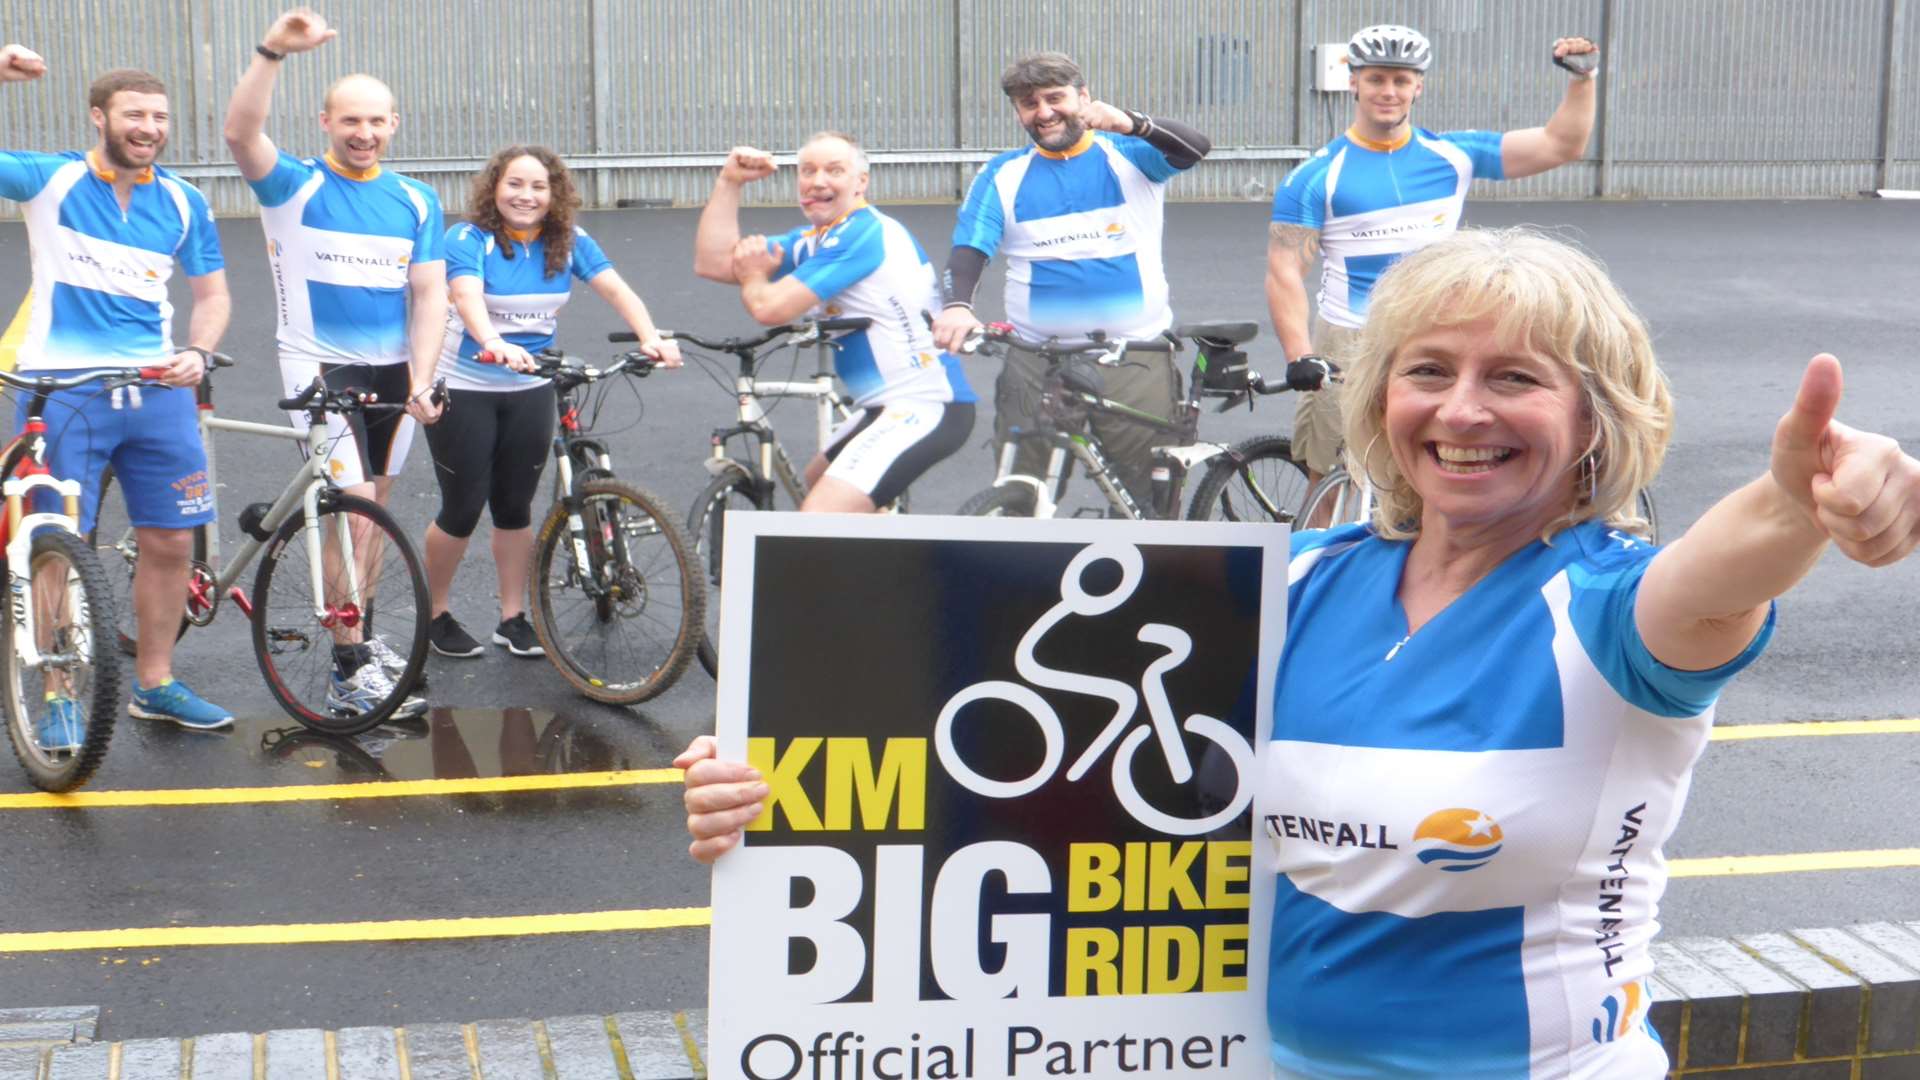 Melanie Rogers and staff at Vattenfall announce key partnership with the KM Big Bike Ride 2016, staged at Betteshanger Park on Sunday, April 24.